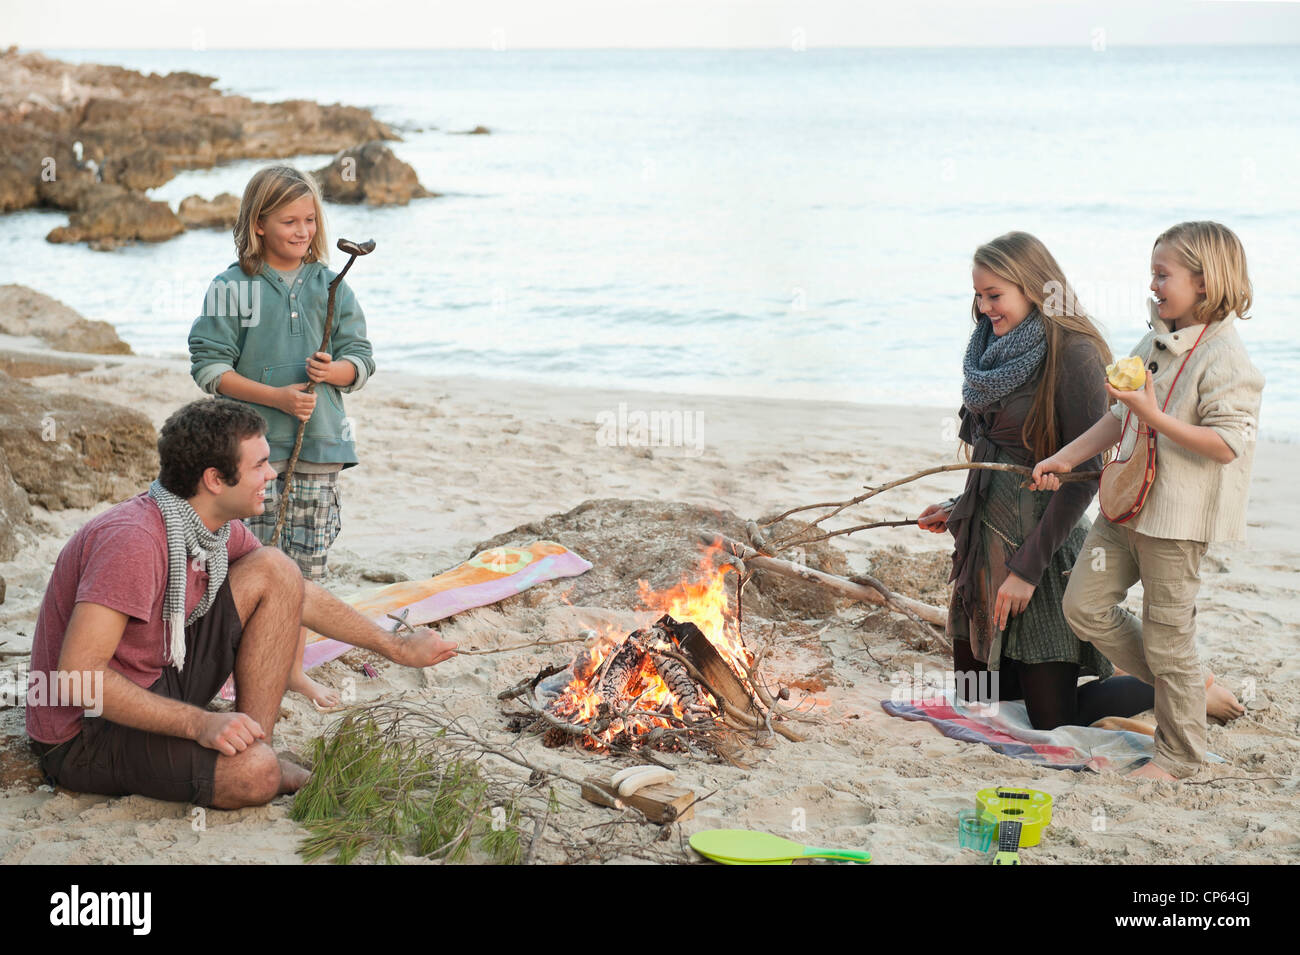 Spain, Mallorca, Friends grilling sausages at camp fire on beach Stock Photo